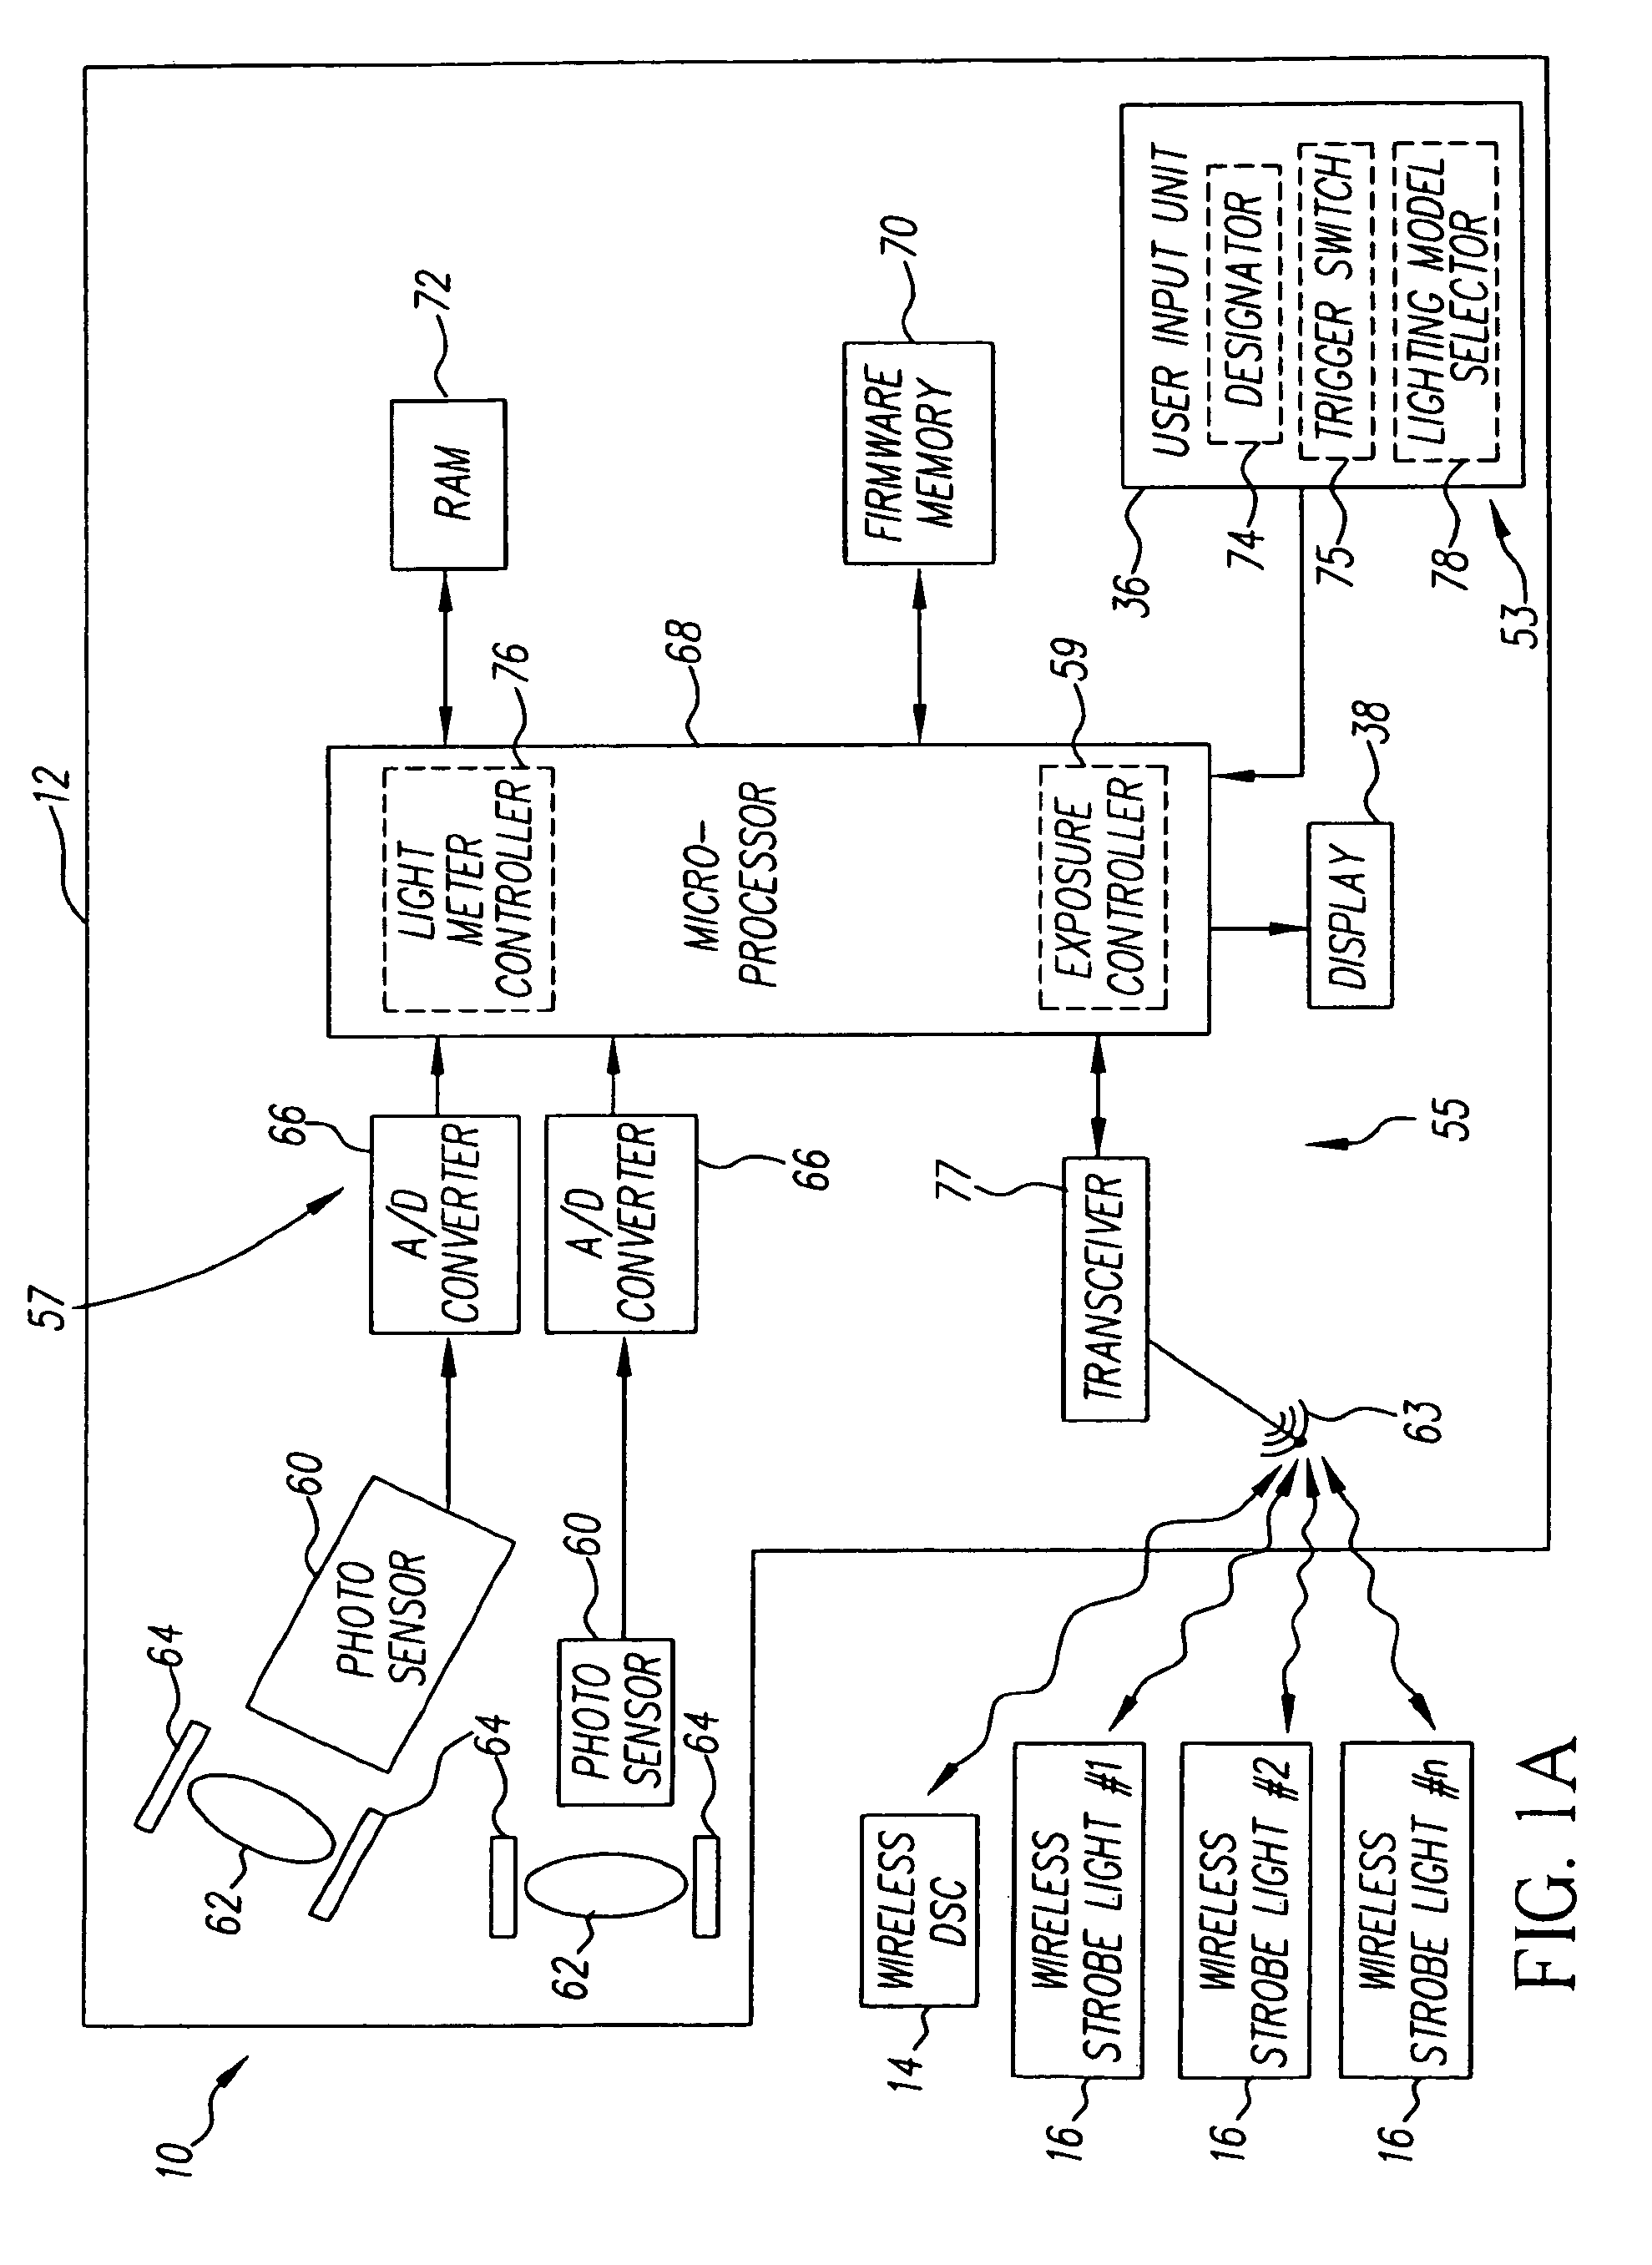 Photographic lightmeter-remote, system, and method